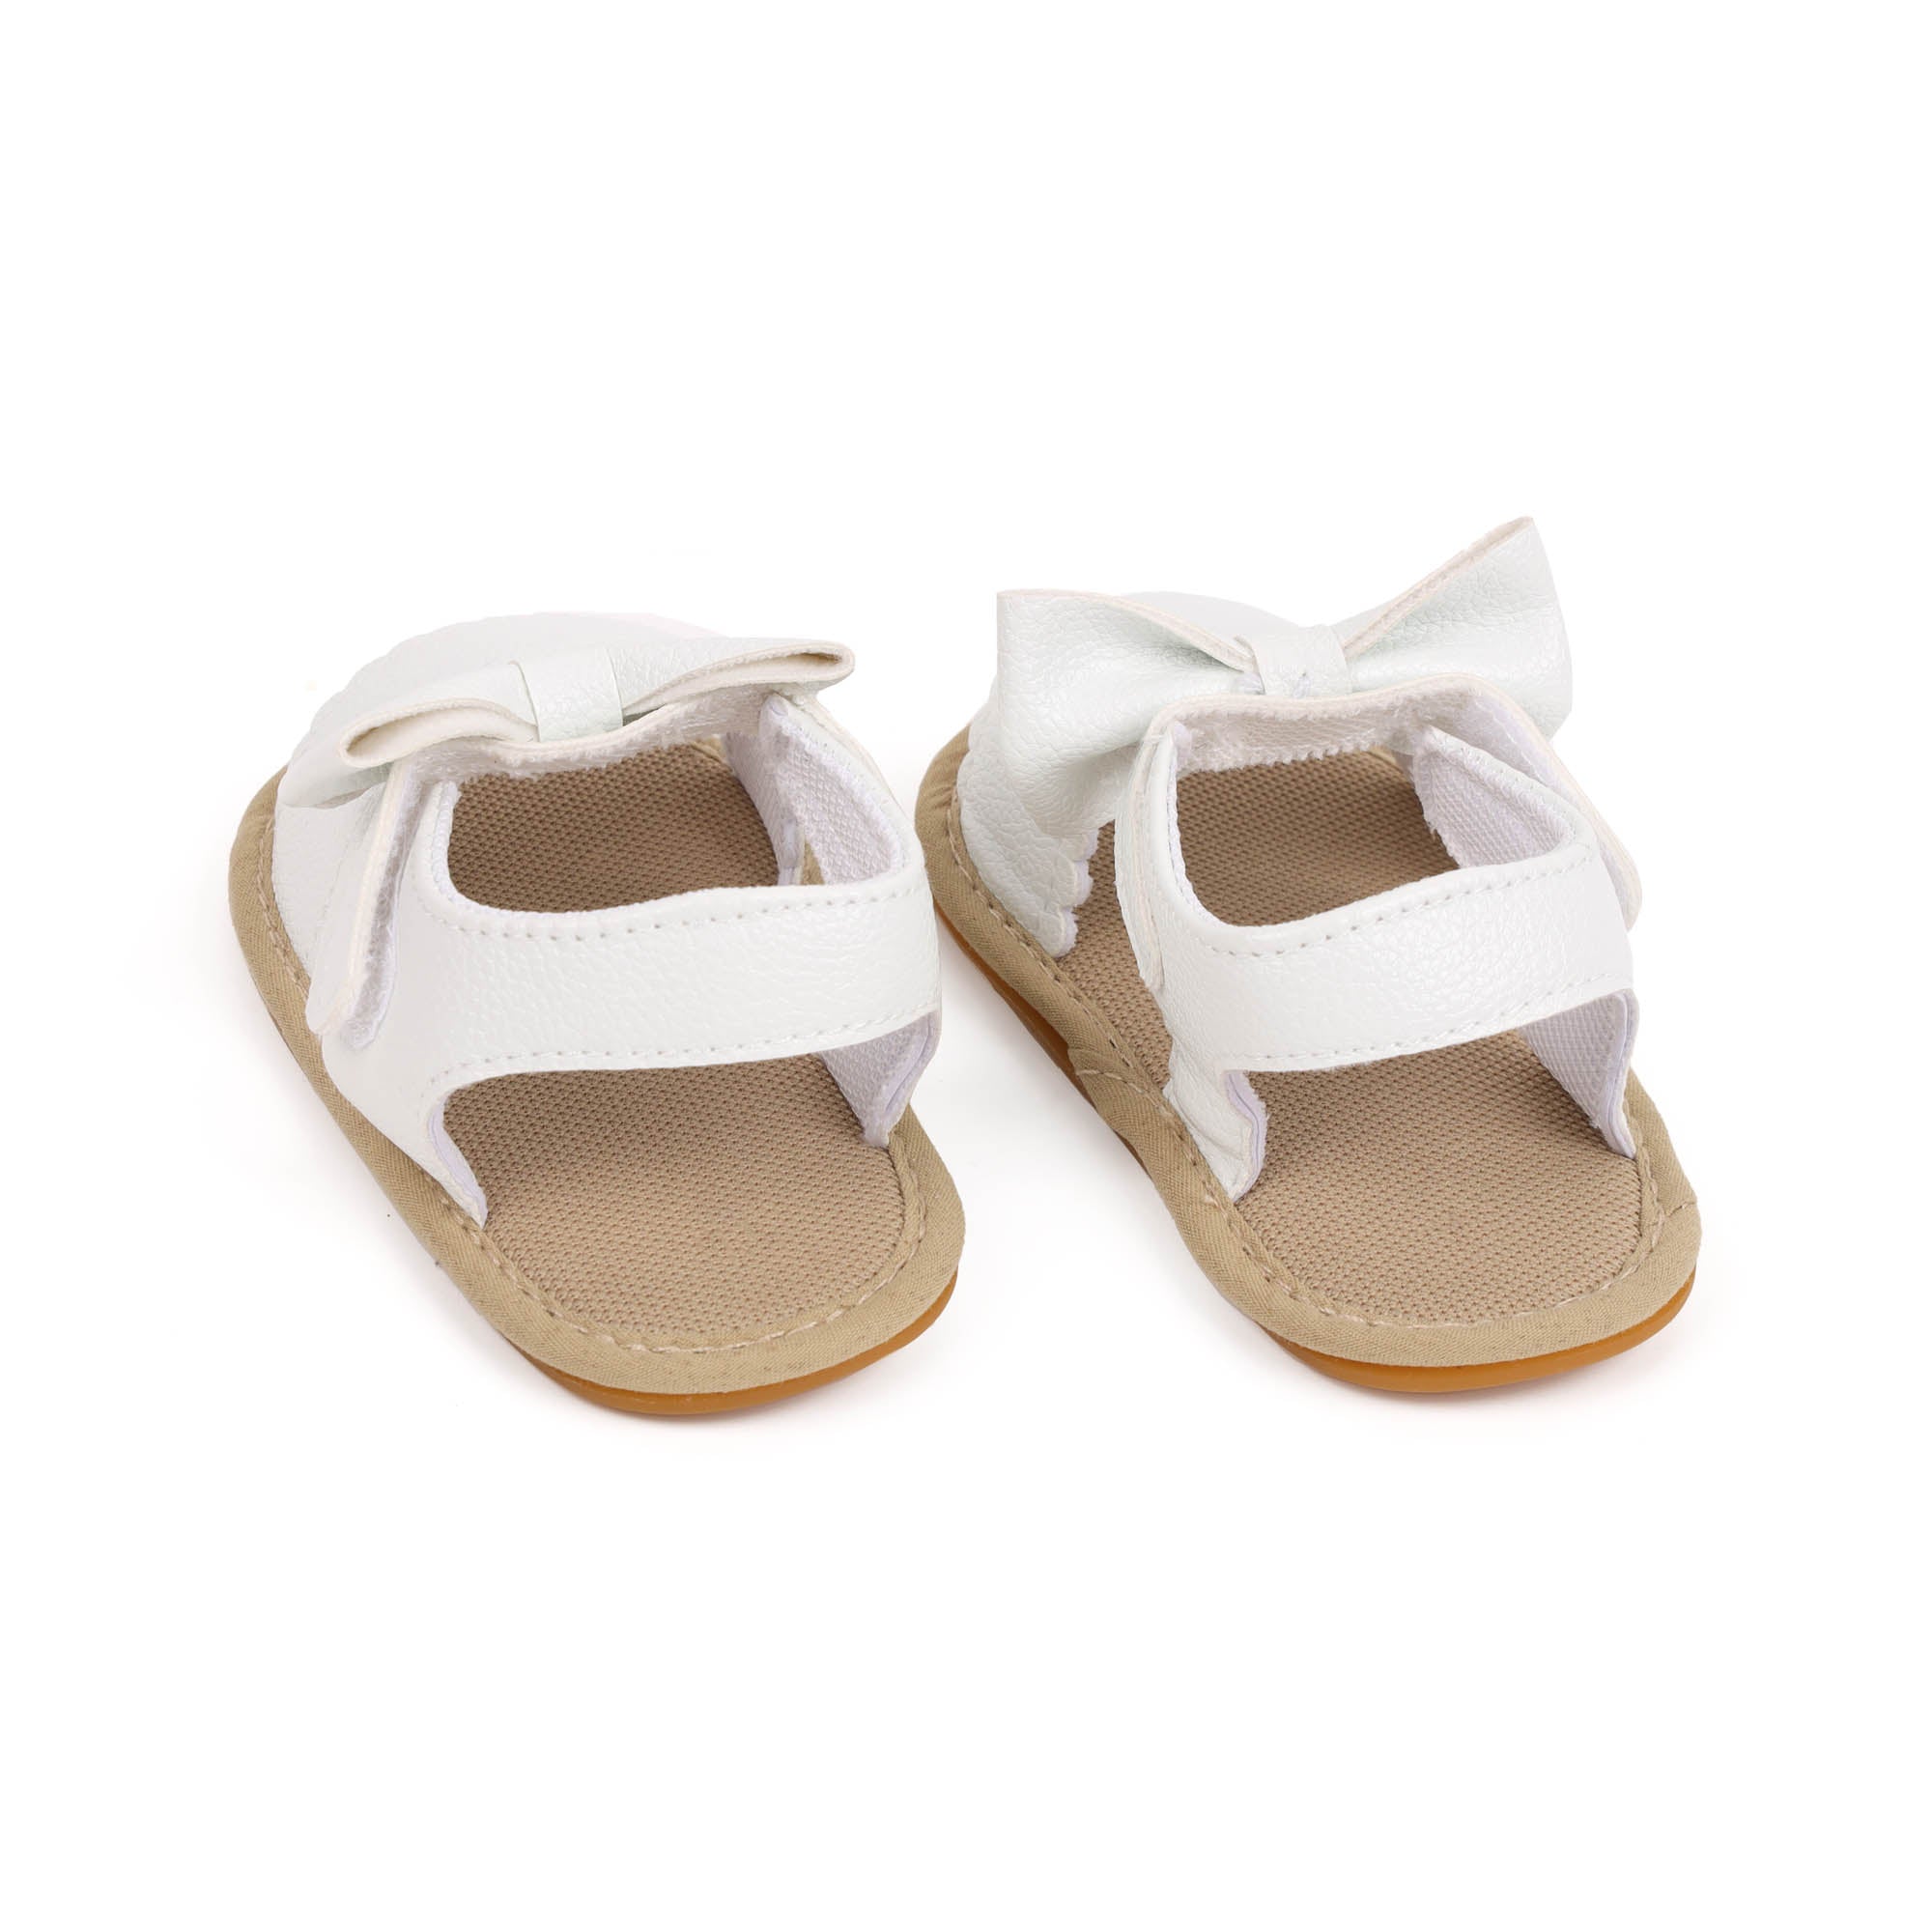 Kicks & Crawl- The Twisted Bow White Bow Sandals